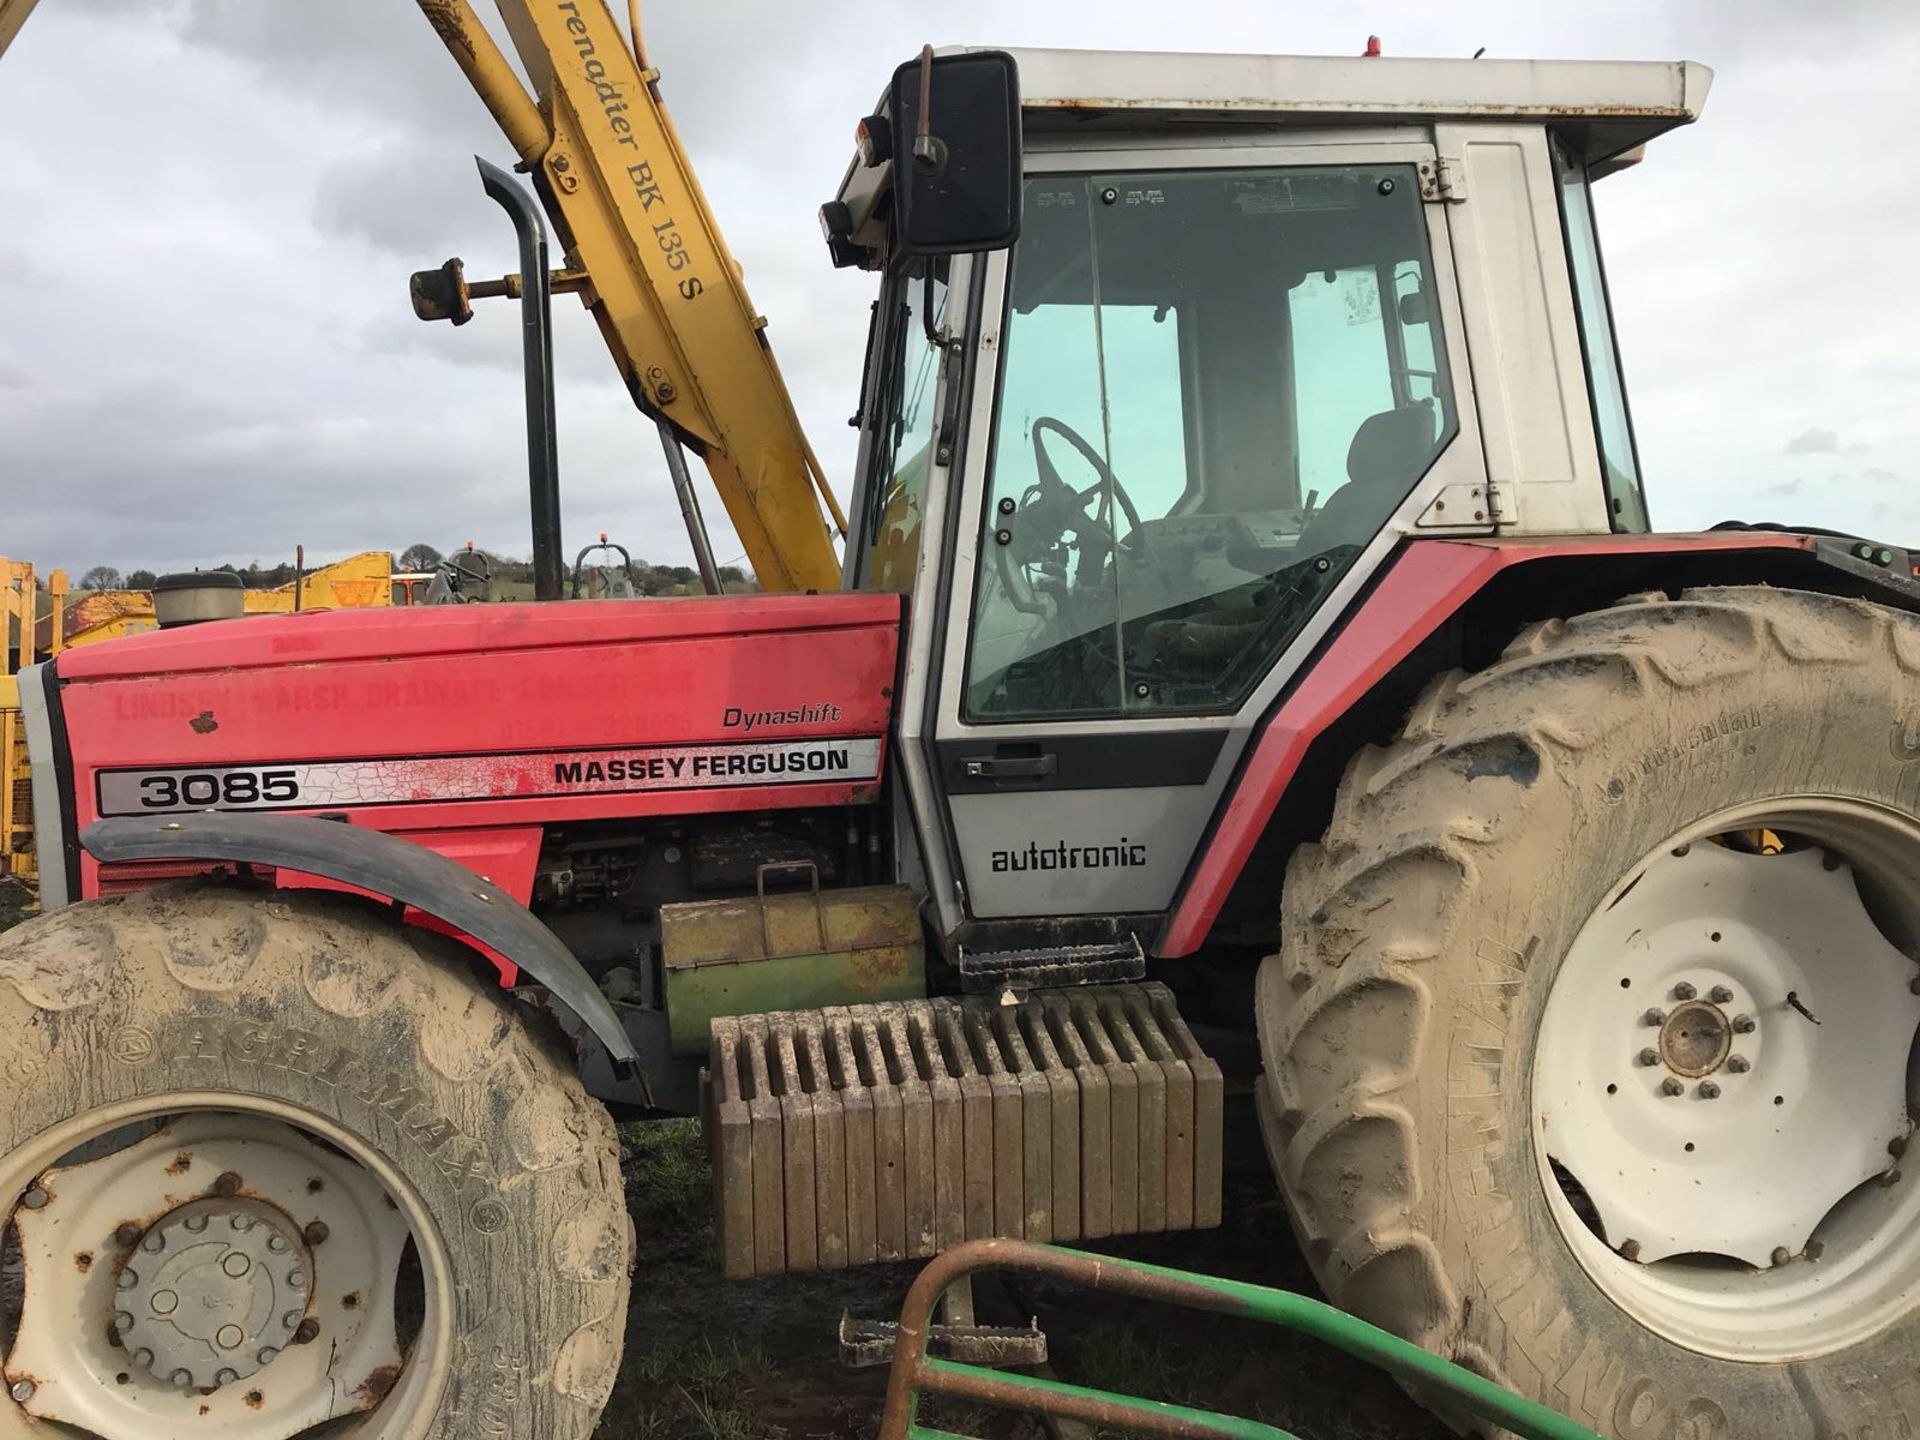 MASSEY FERGUSON 3085 DYNASHIFT AUTOTRONIC TRACTOR WITH DITCHER AND HEDGE CUTTER ATTACHMENT - Bild 9 aus 11